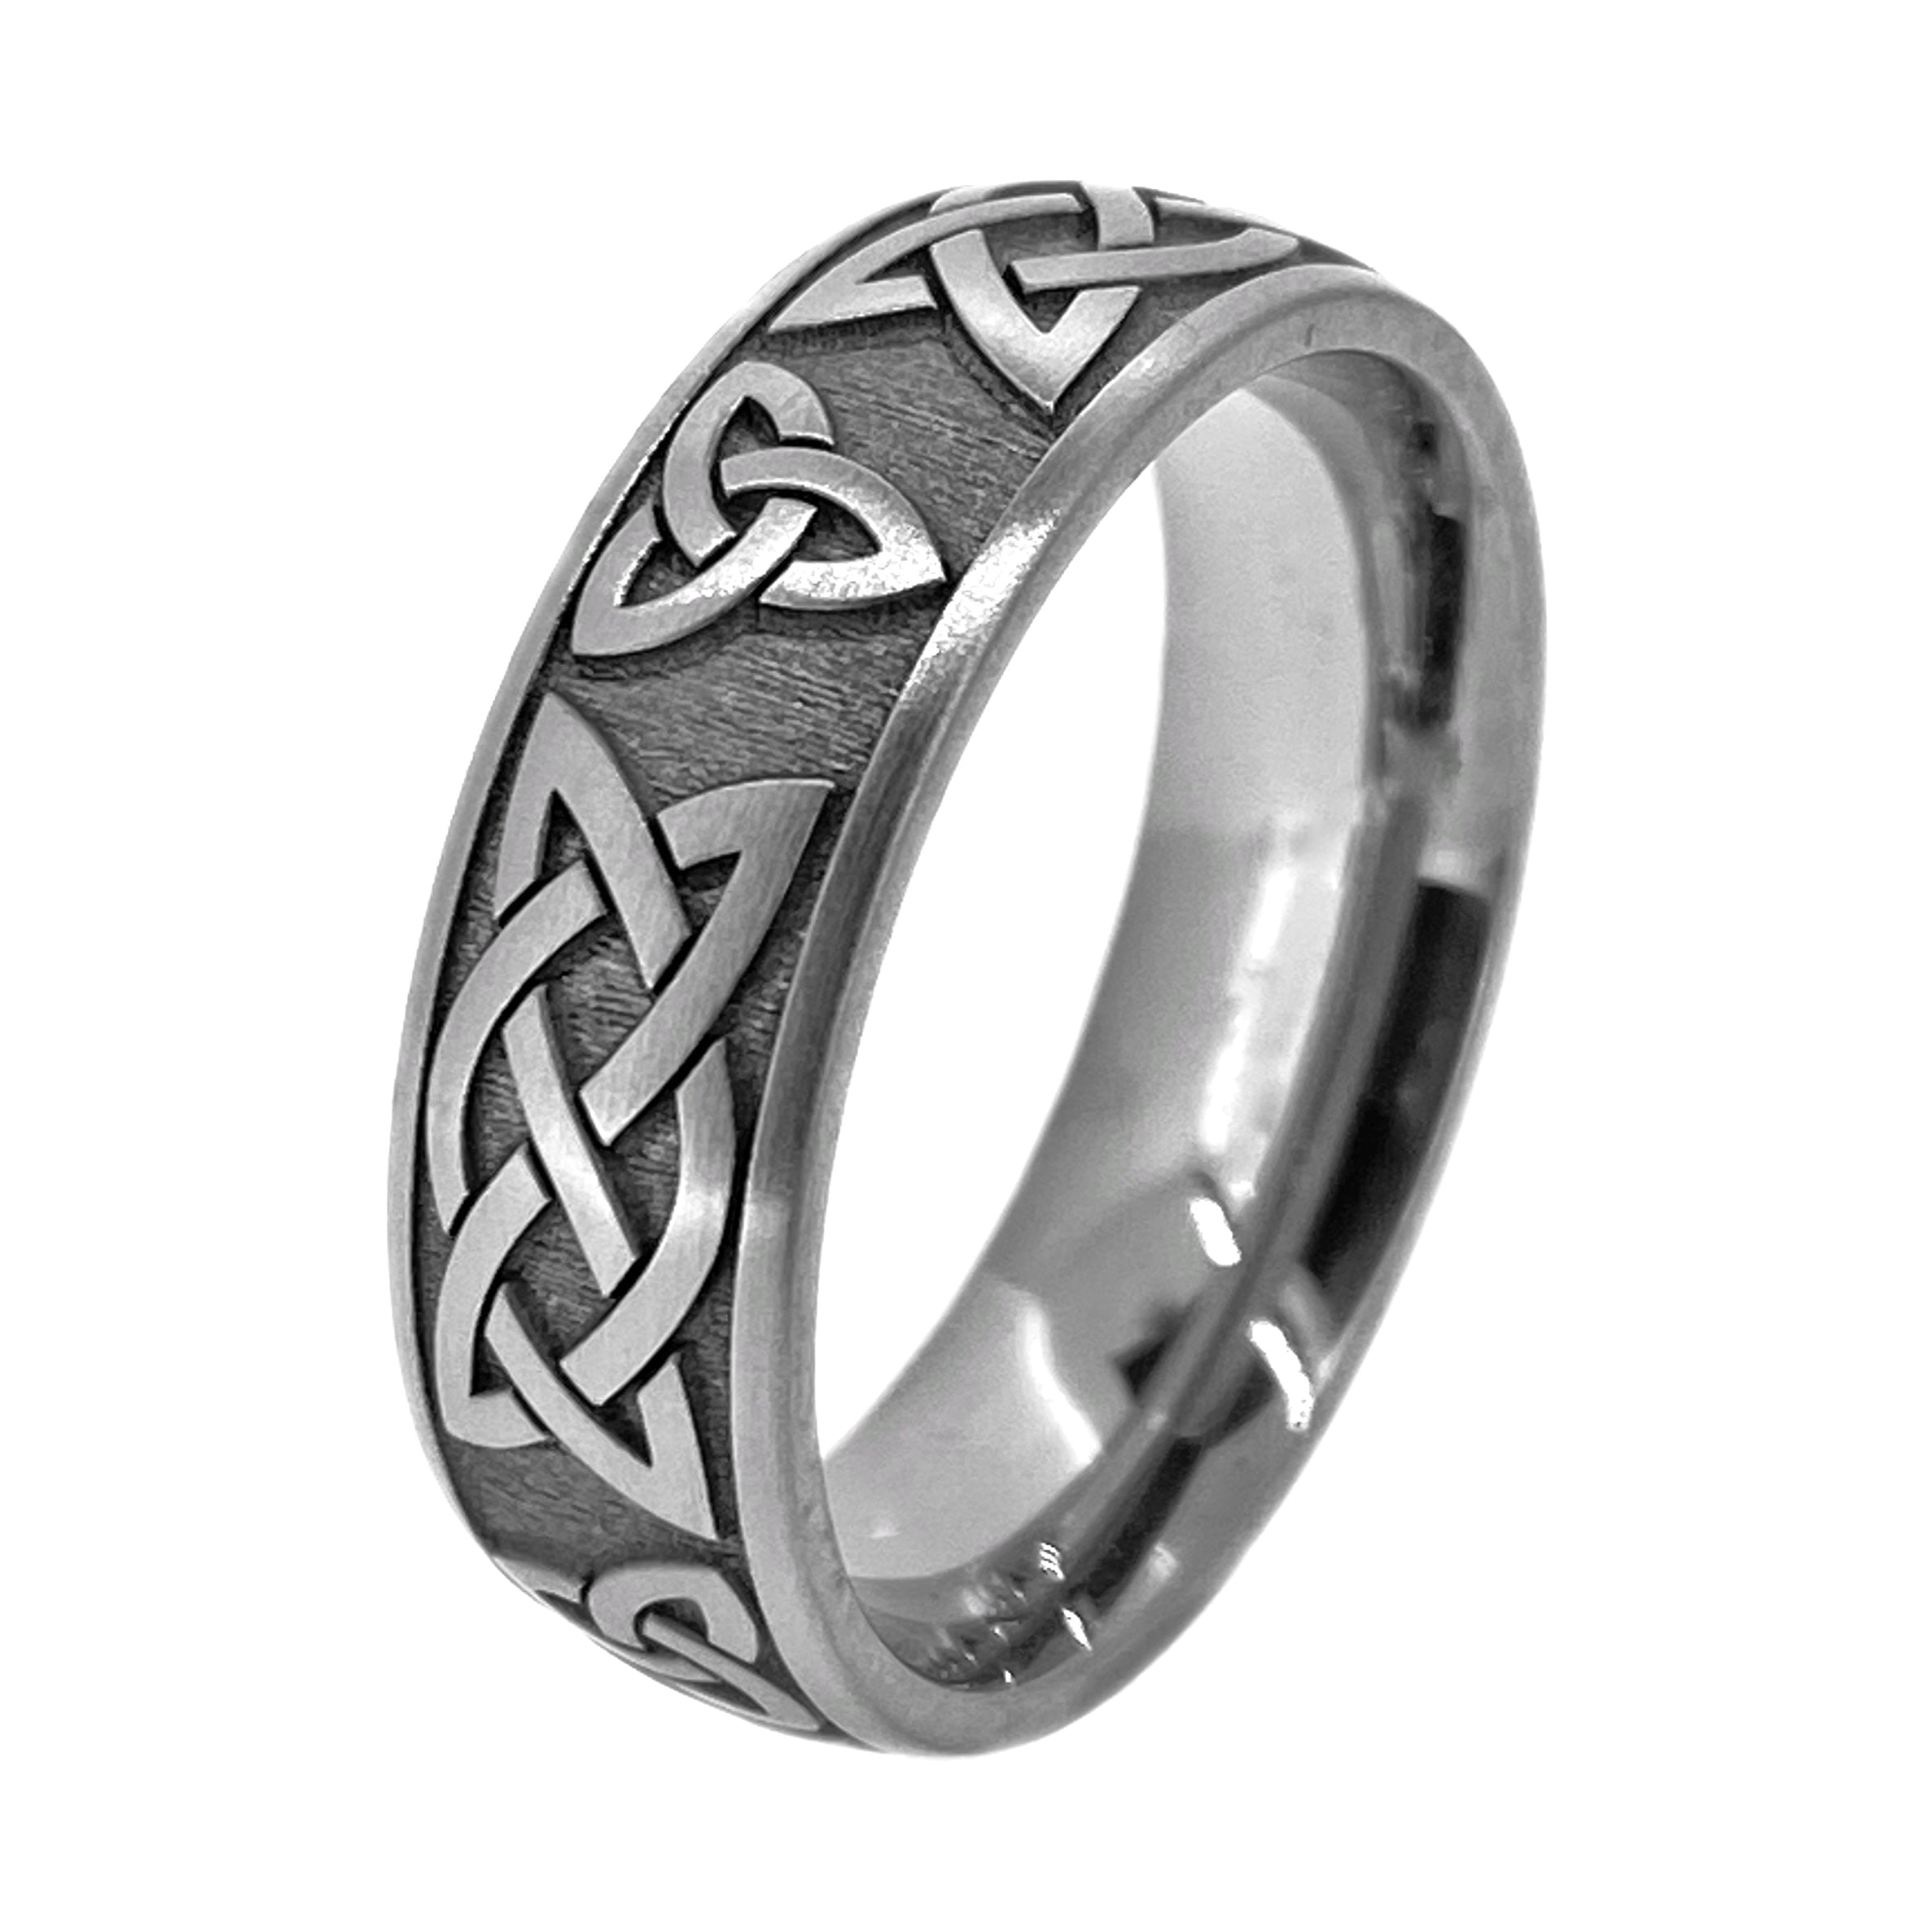 Custom Engraved Rings, Silver Hammered Ring, Personalized Ring, Wide Band  Rings For Women, Anniversary Gift, Spiritual Rings, Love Ring –  salijewelry.com